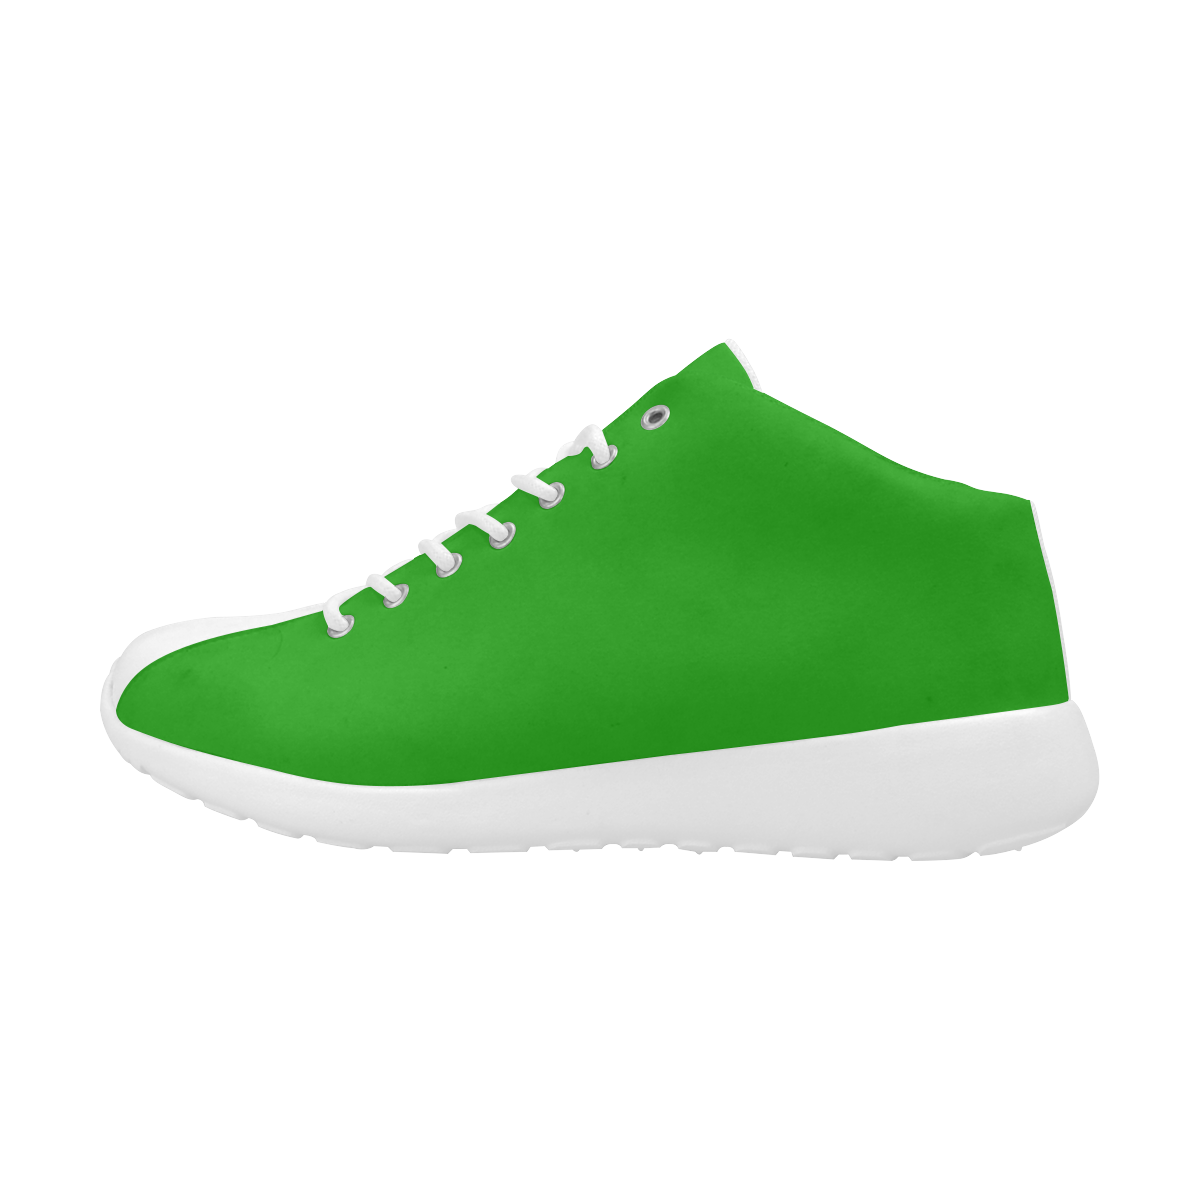 Notable Neon Green Solid Colored Men's Basketball Training Shoes (Model 47502)